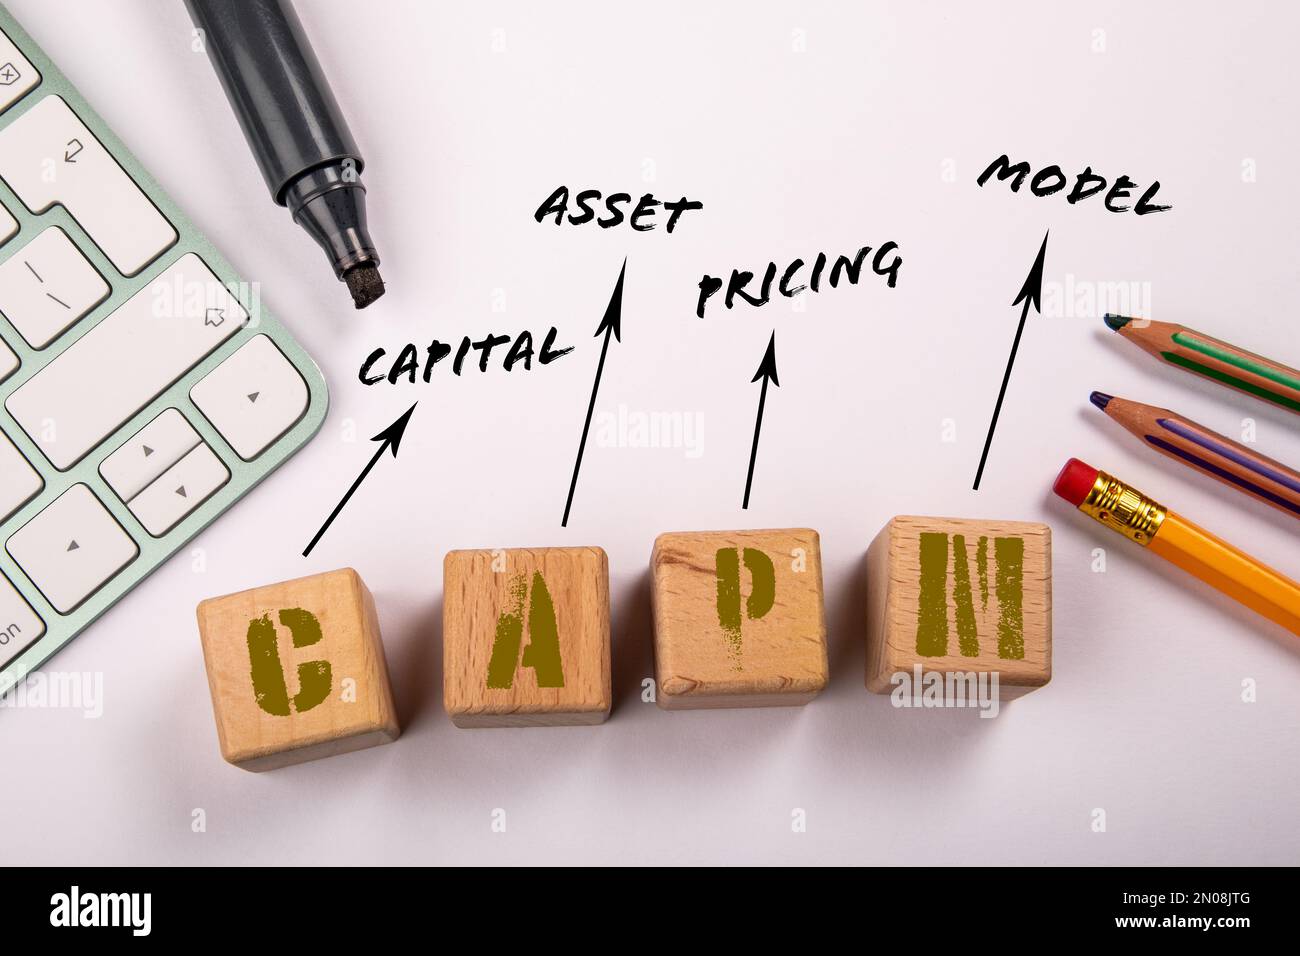 CAPM - Capital Asset Pricing Model. Wooden blocks on a white office table. Stock Photo